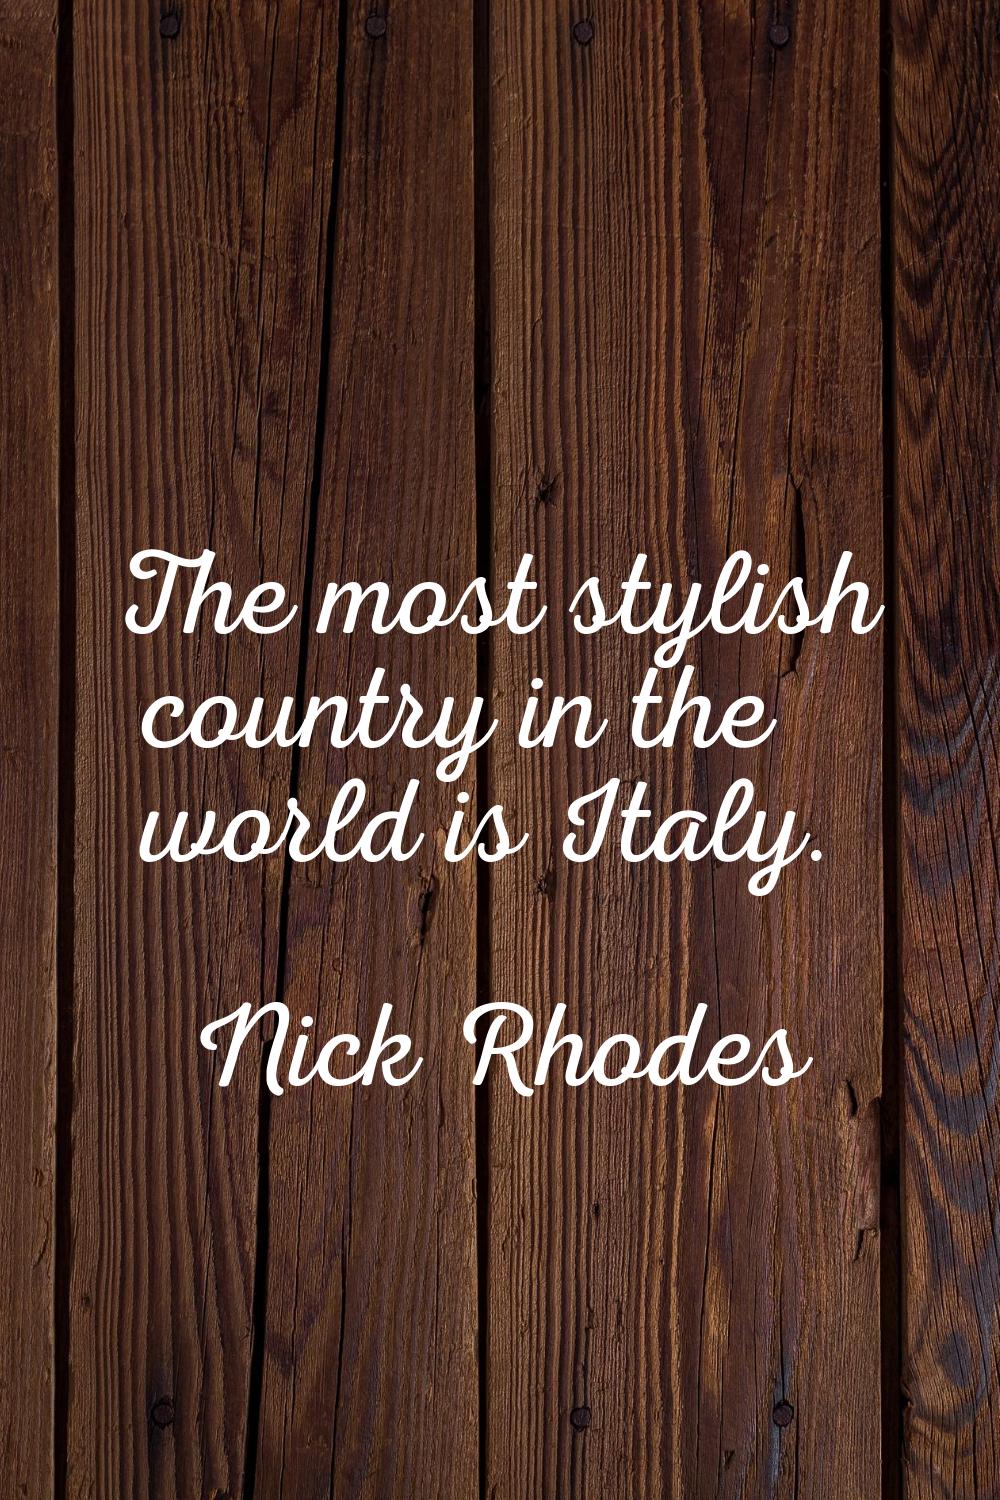 The most stylish country in the world is Italy.